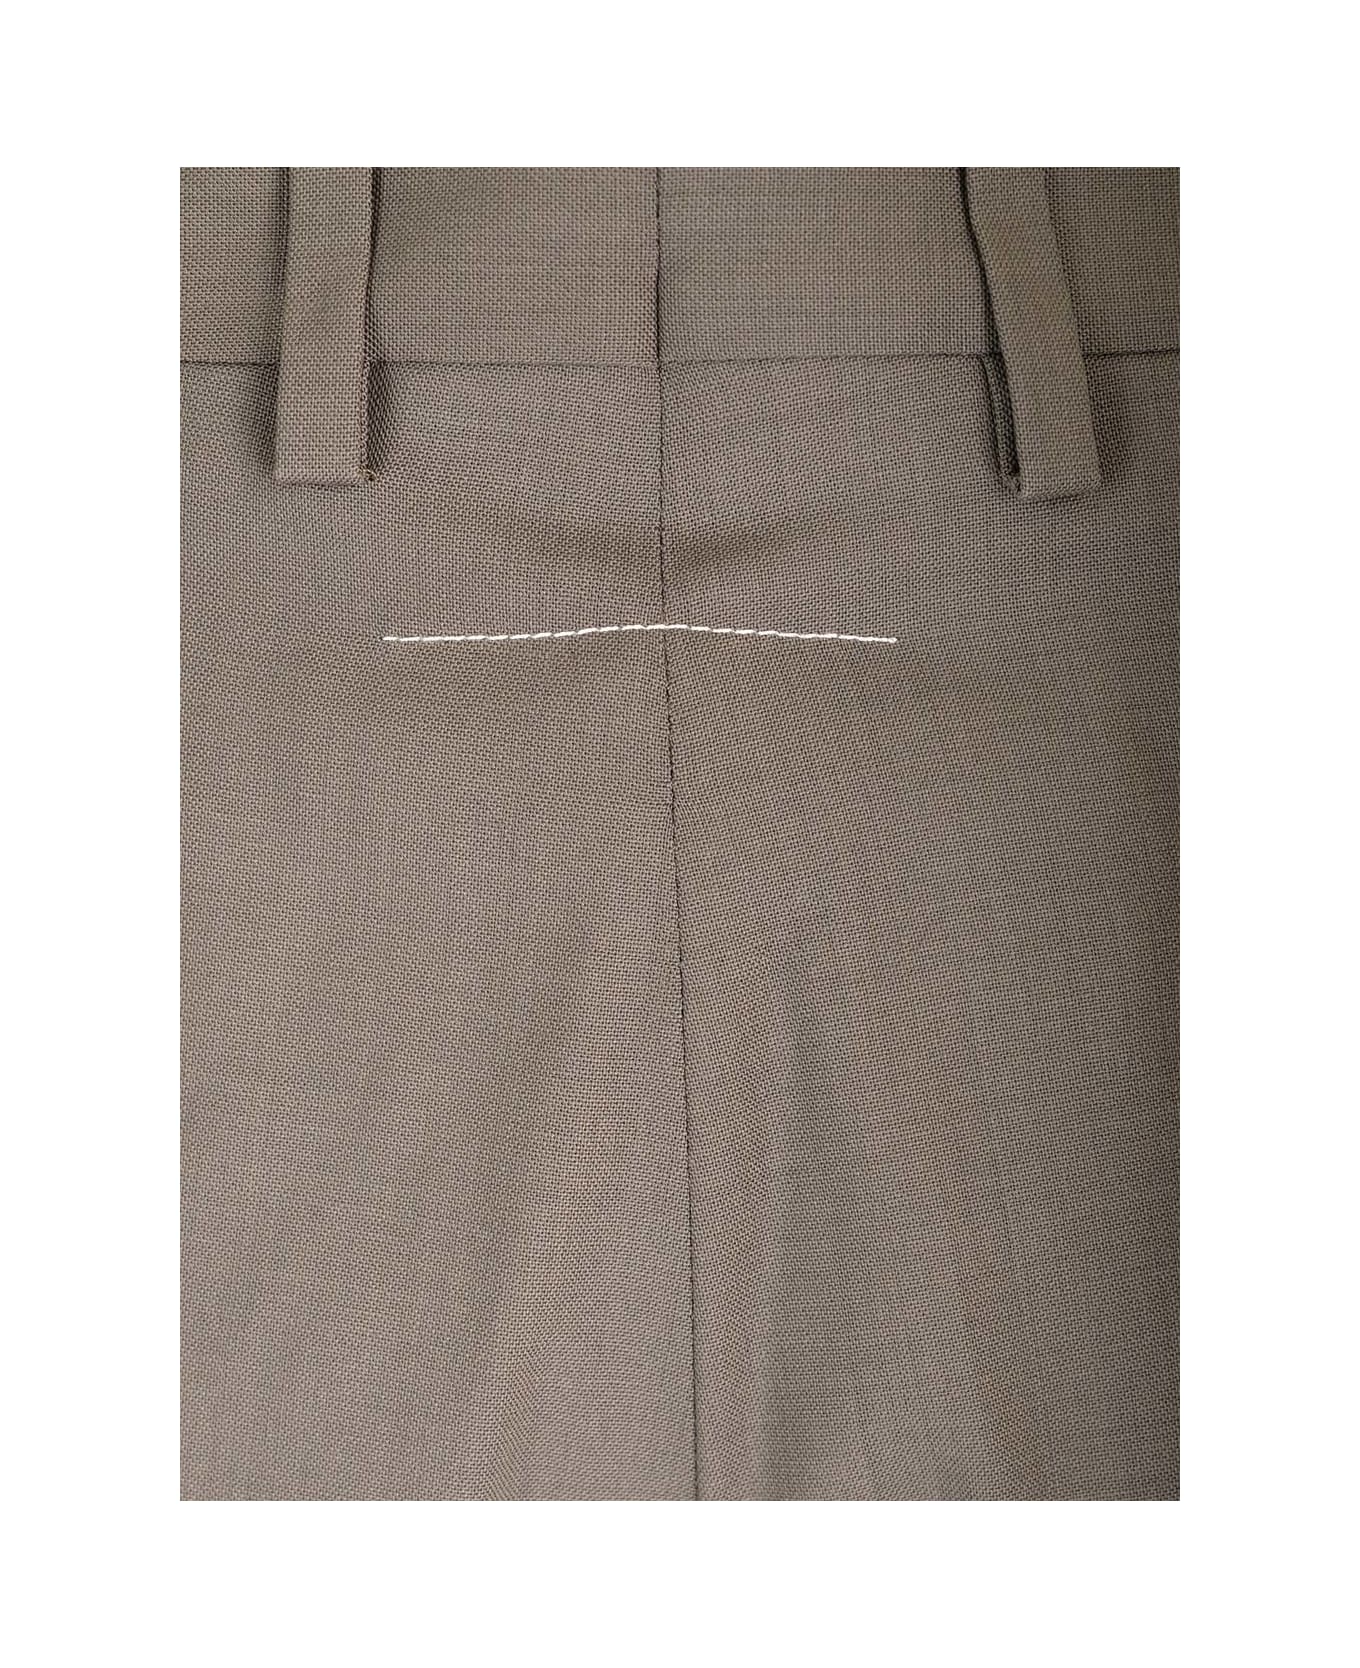 MM6 Maison Margiela Tailored Wool Trousers - Brown